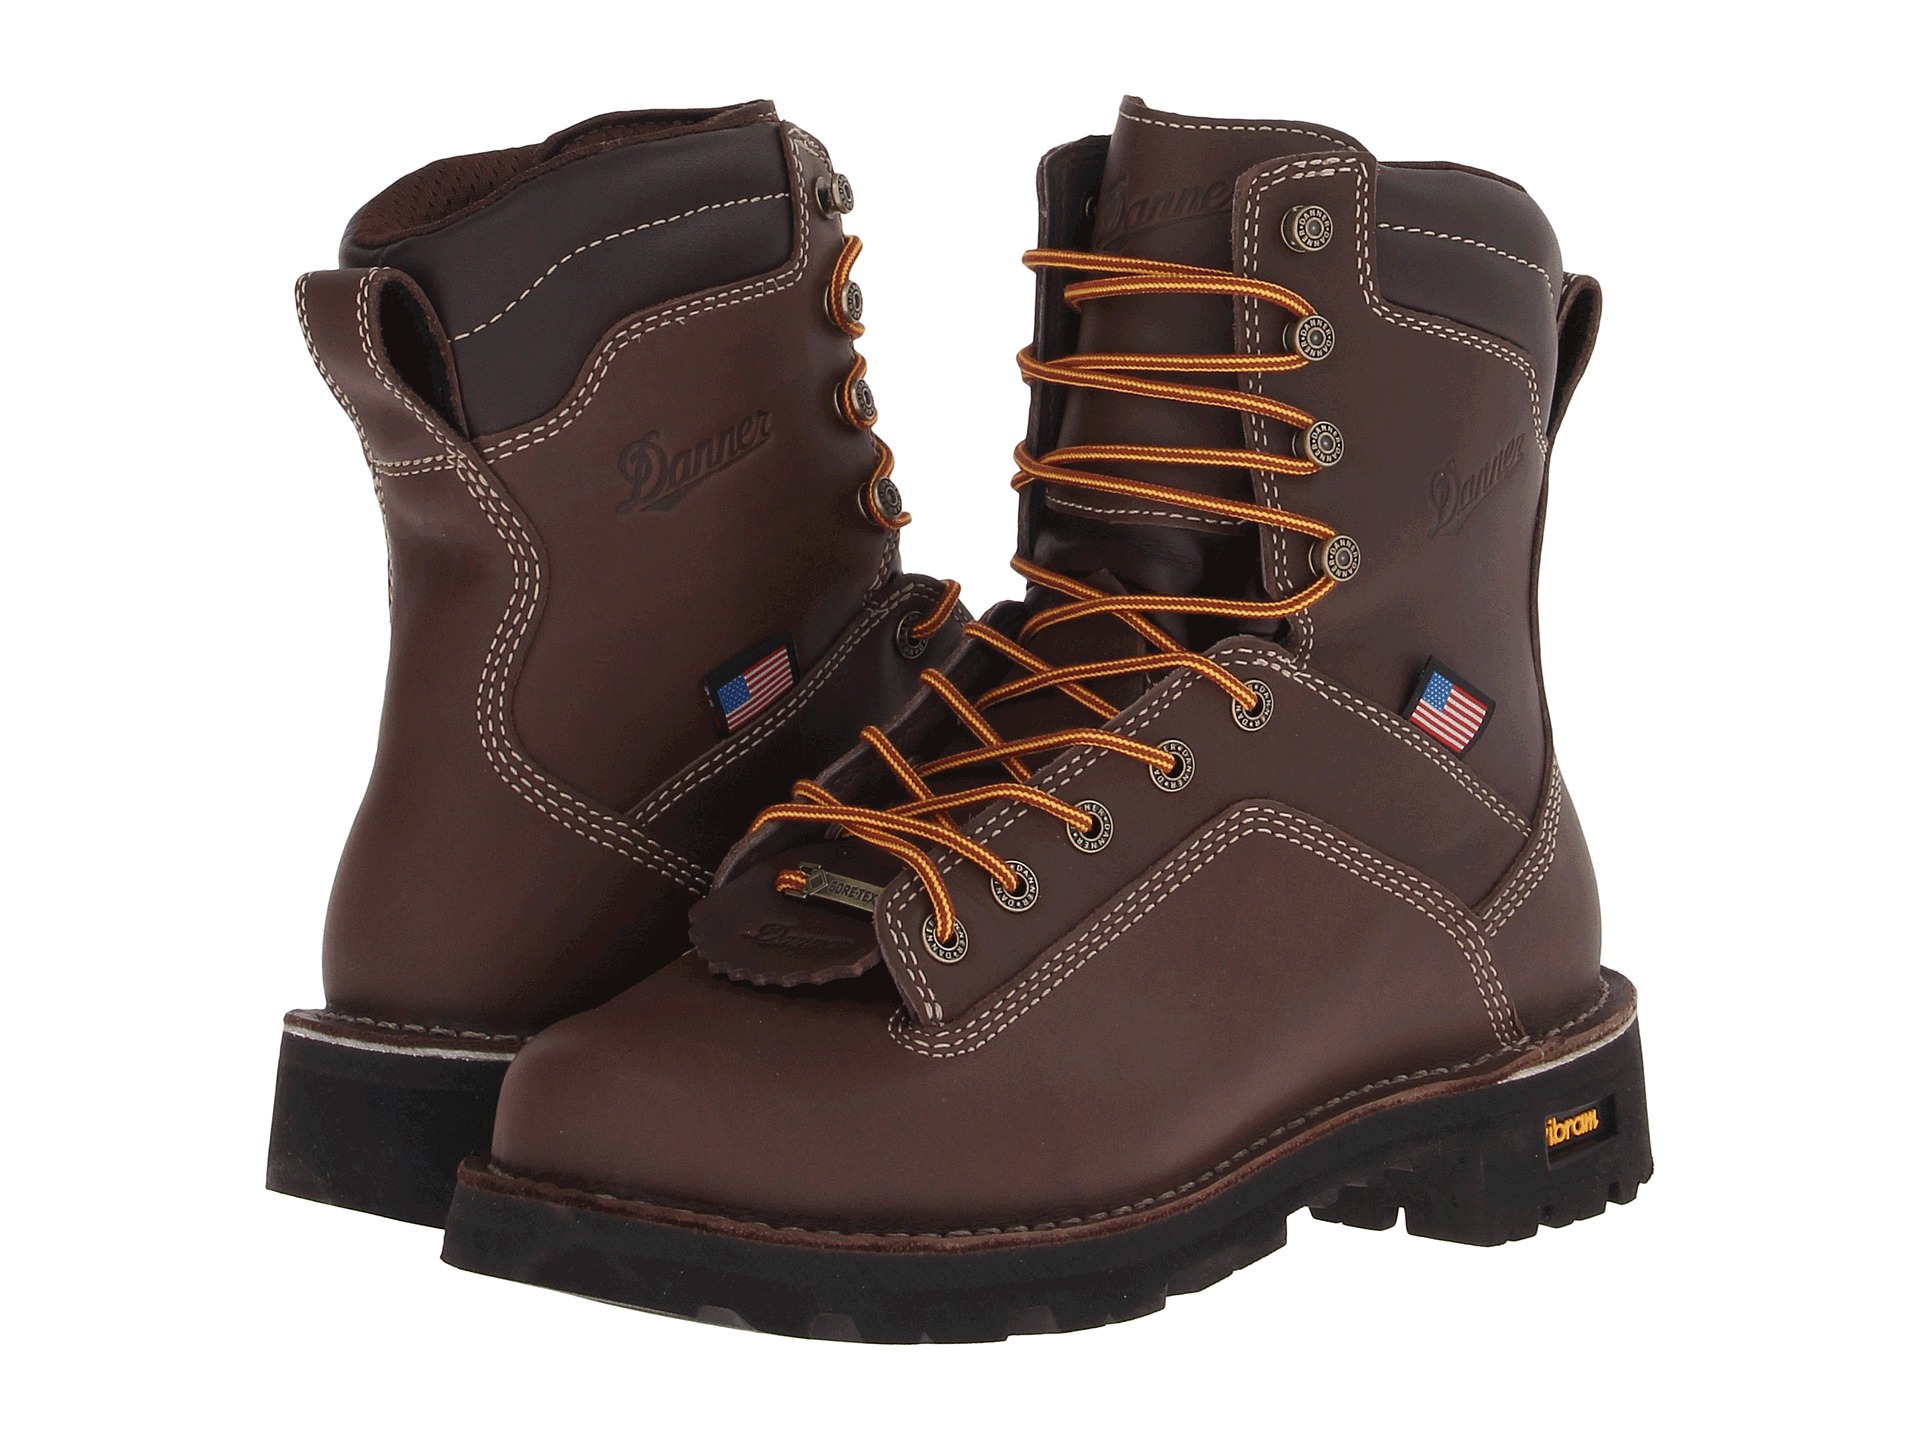 Danner Boots Phone Number - Yu Boots